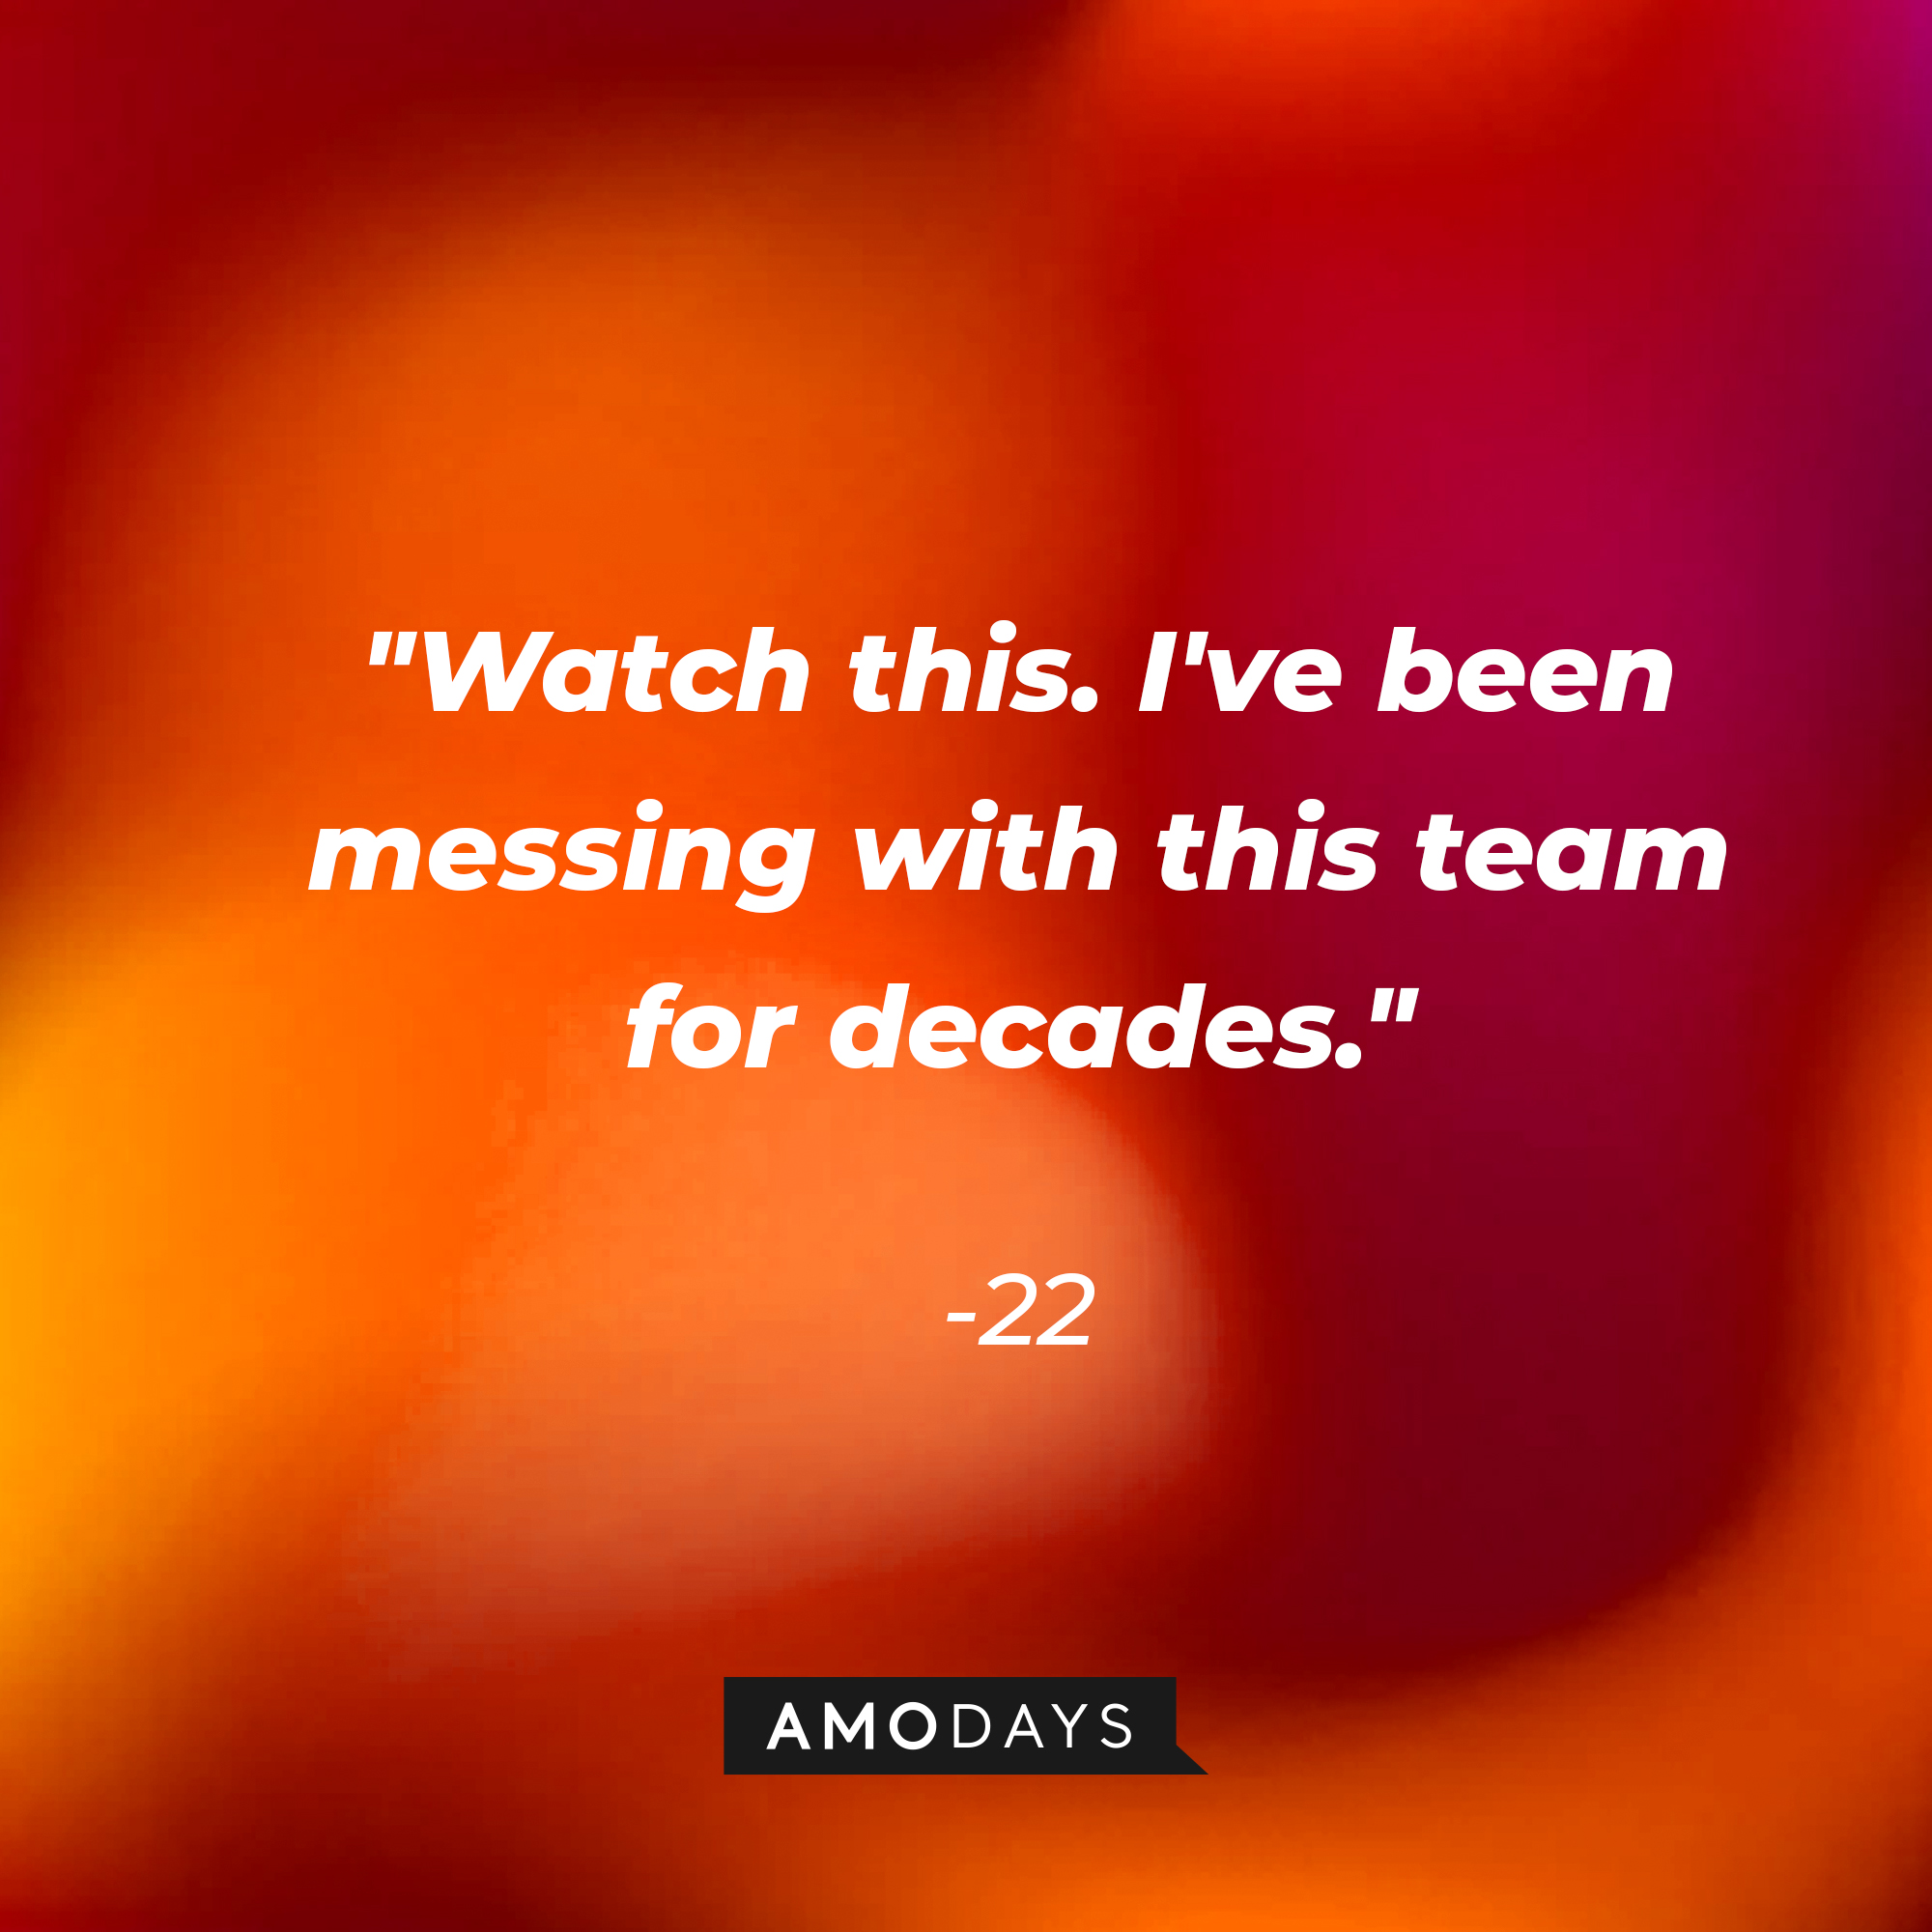 22's quote: "Watch this. I've been messing with this team for decades." | Source: youtube.com/pixar